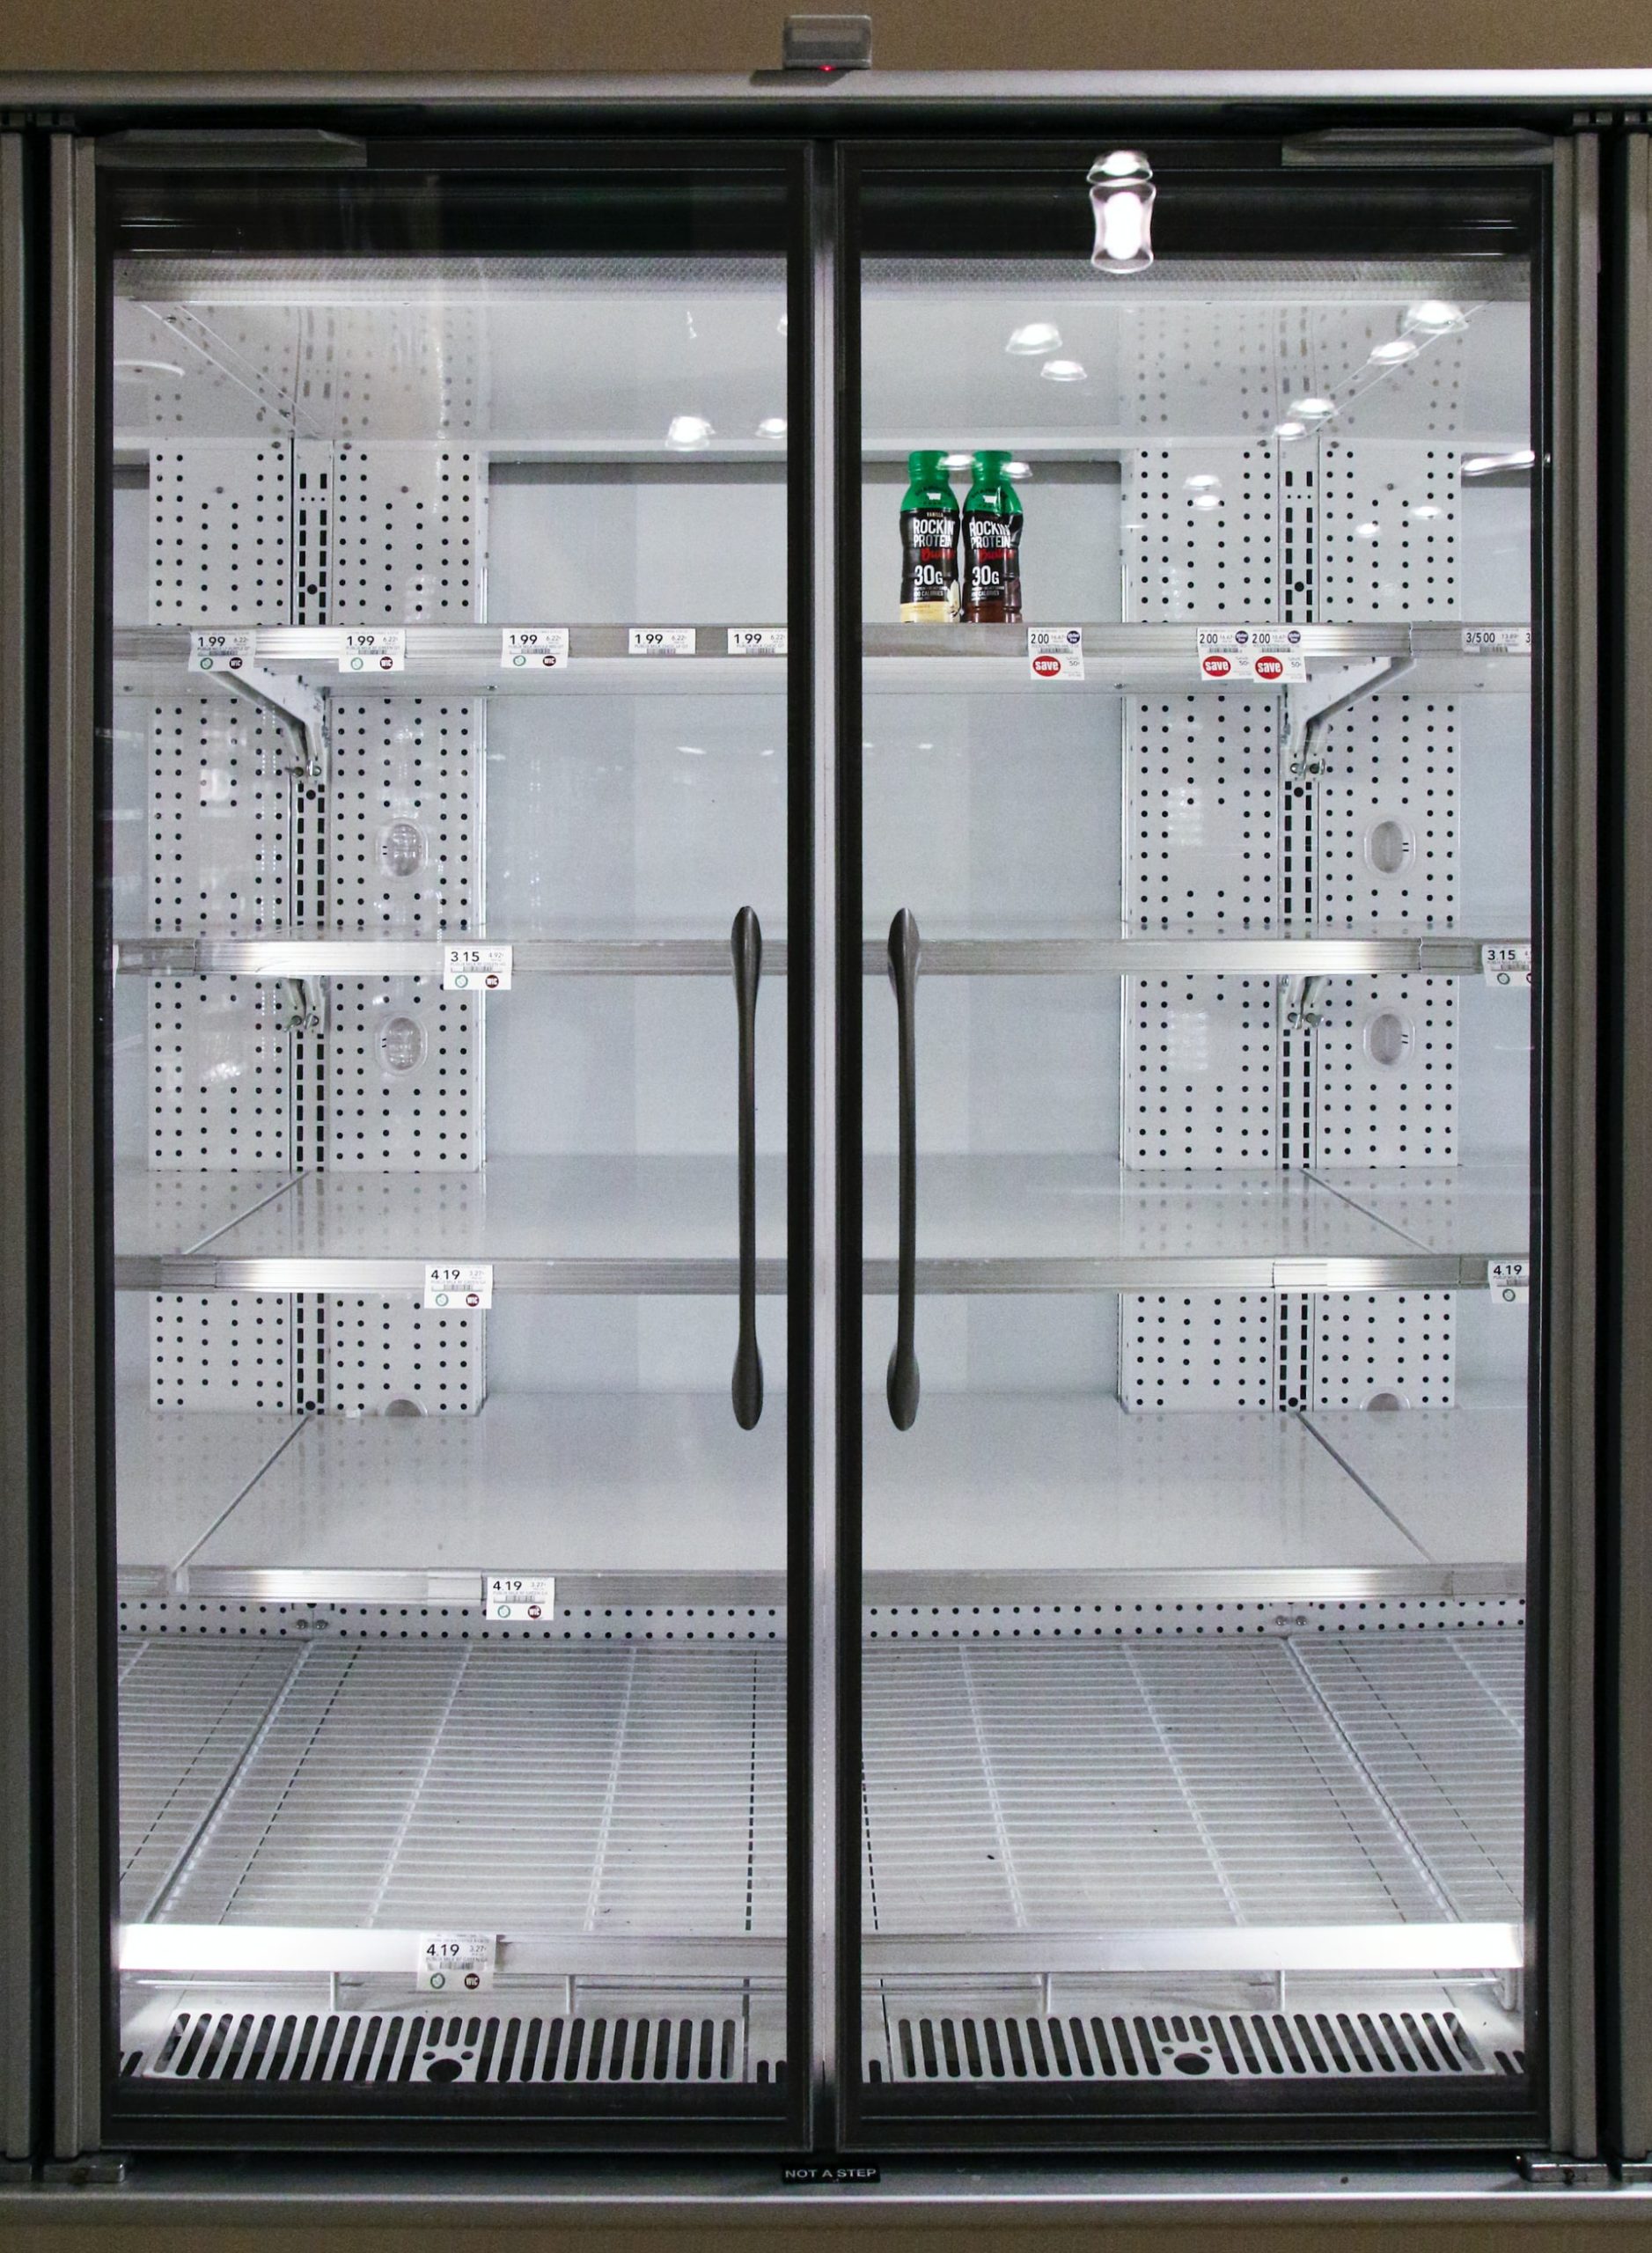 How to Take Care of Your Commercial Refrigeration?